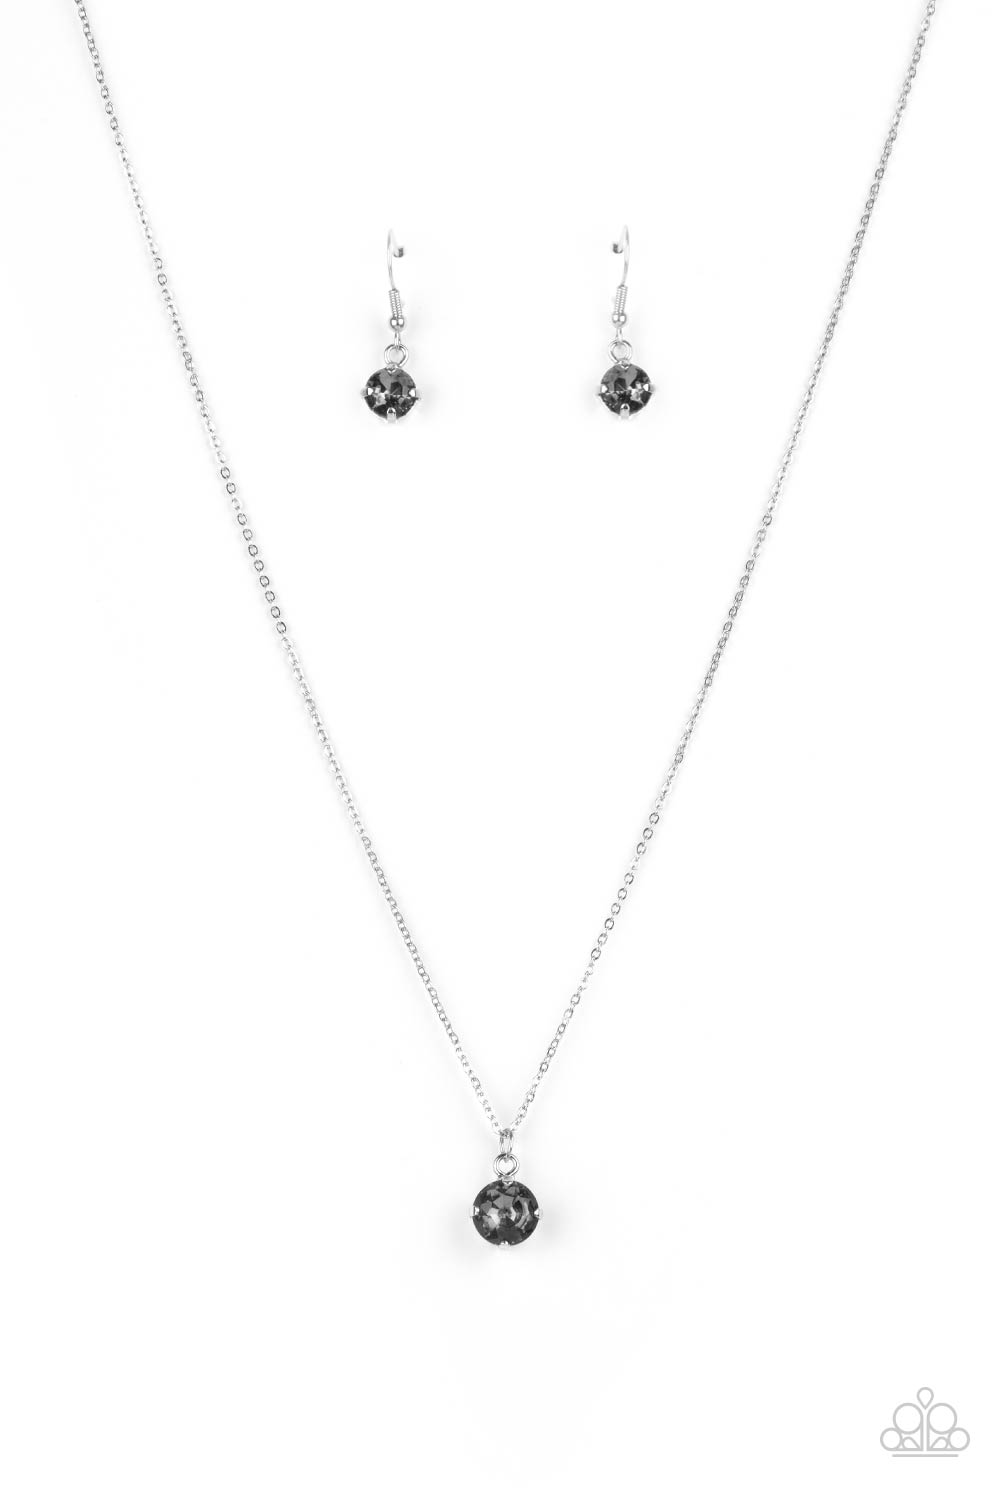 Necklace - Undeniably Demure - Silver